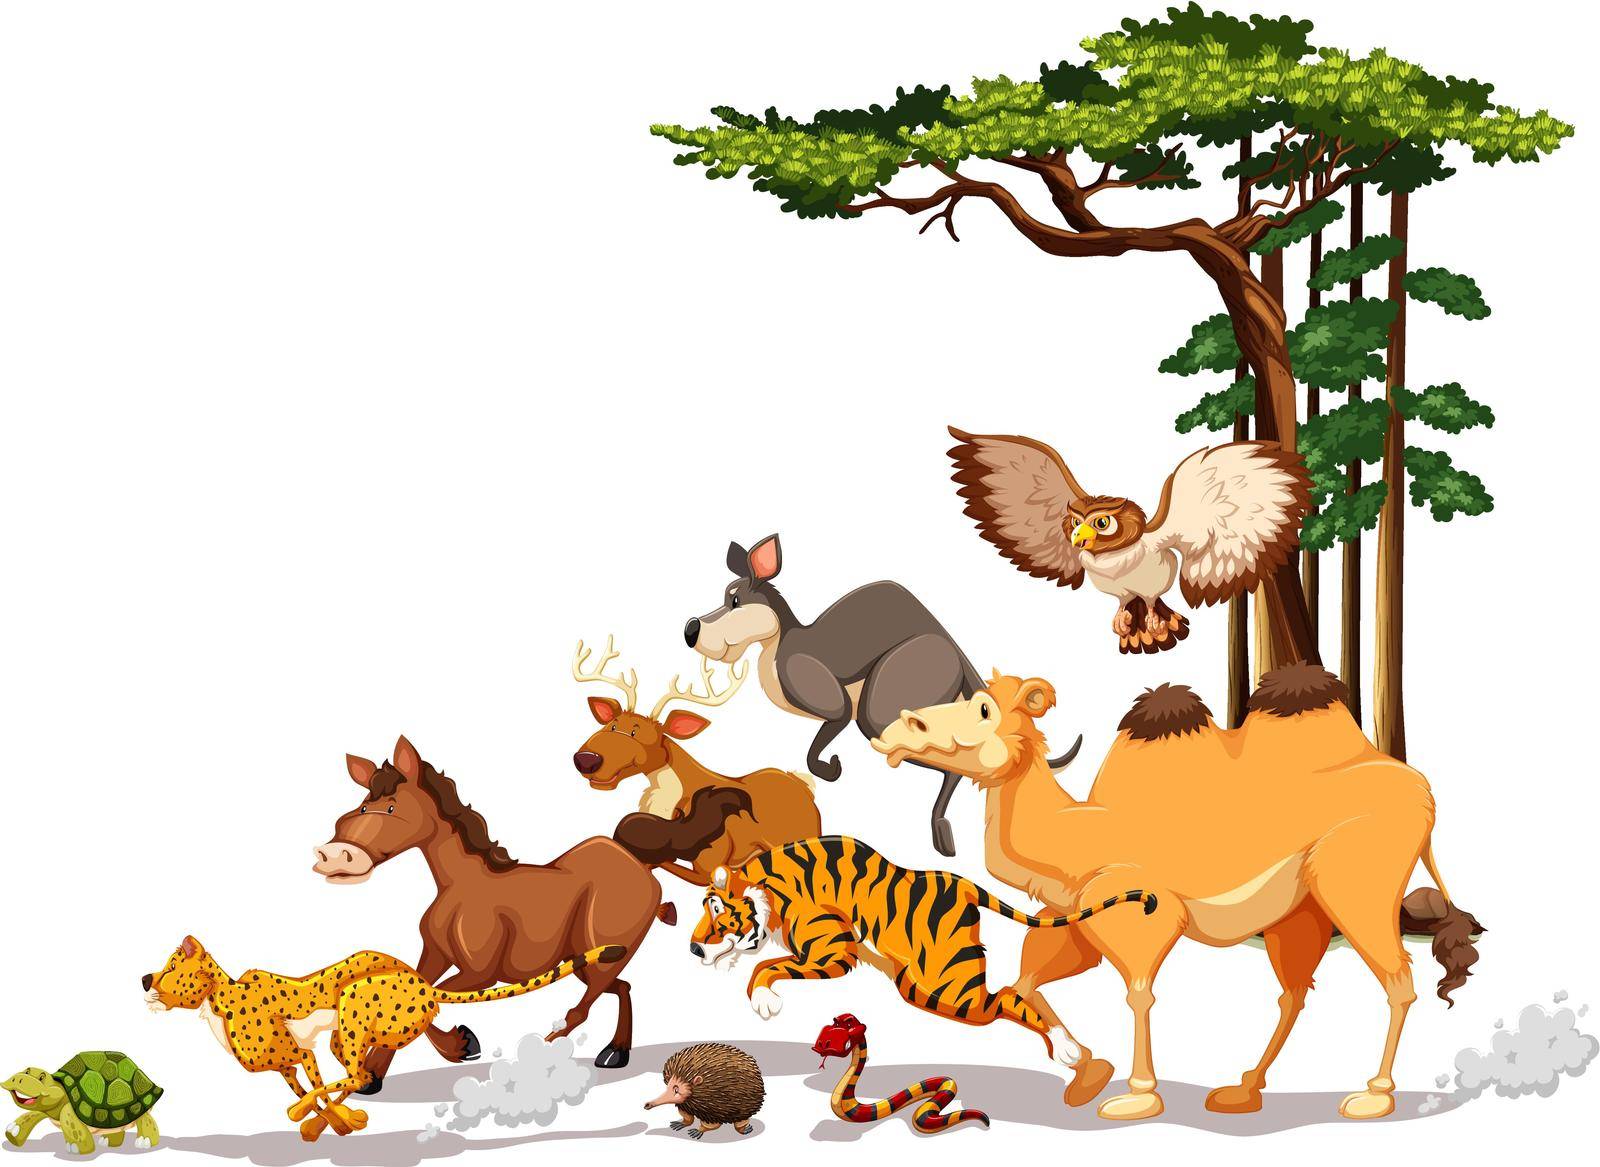 Wild animals in a race competition